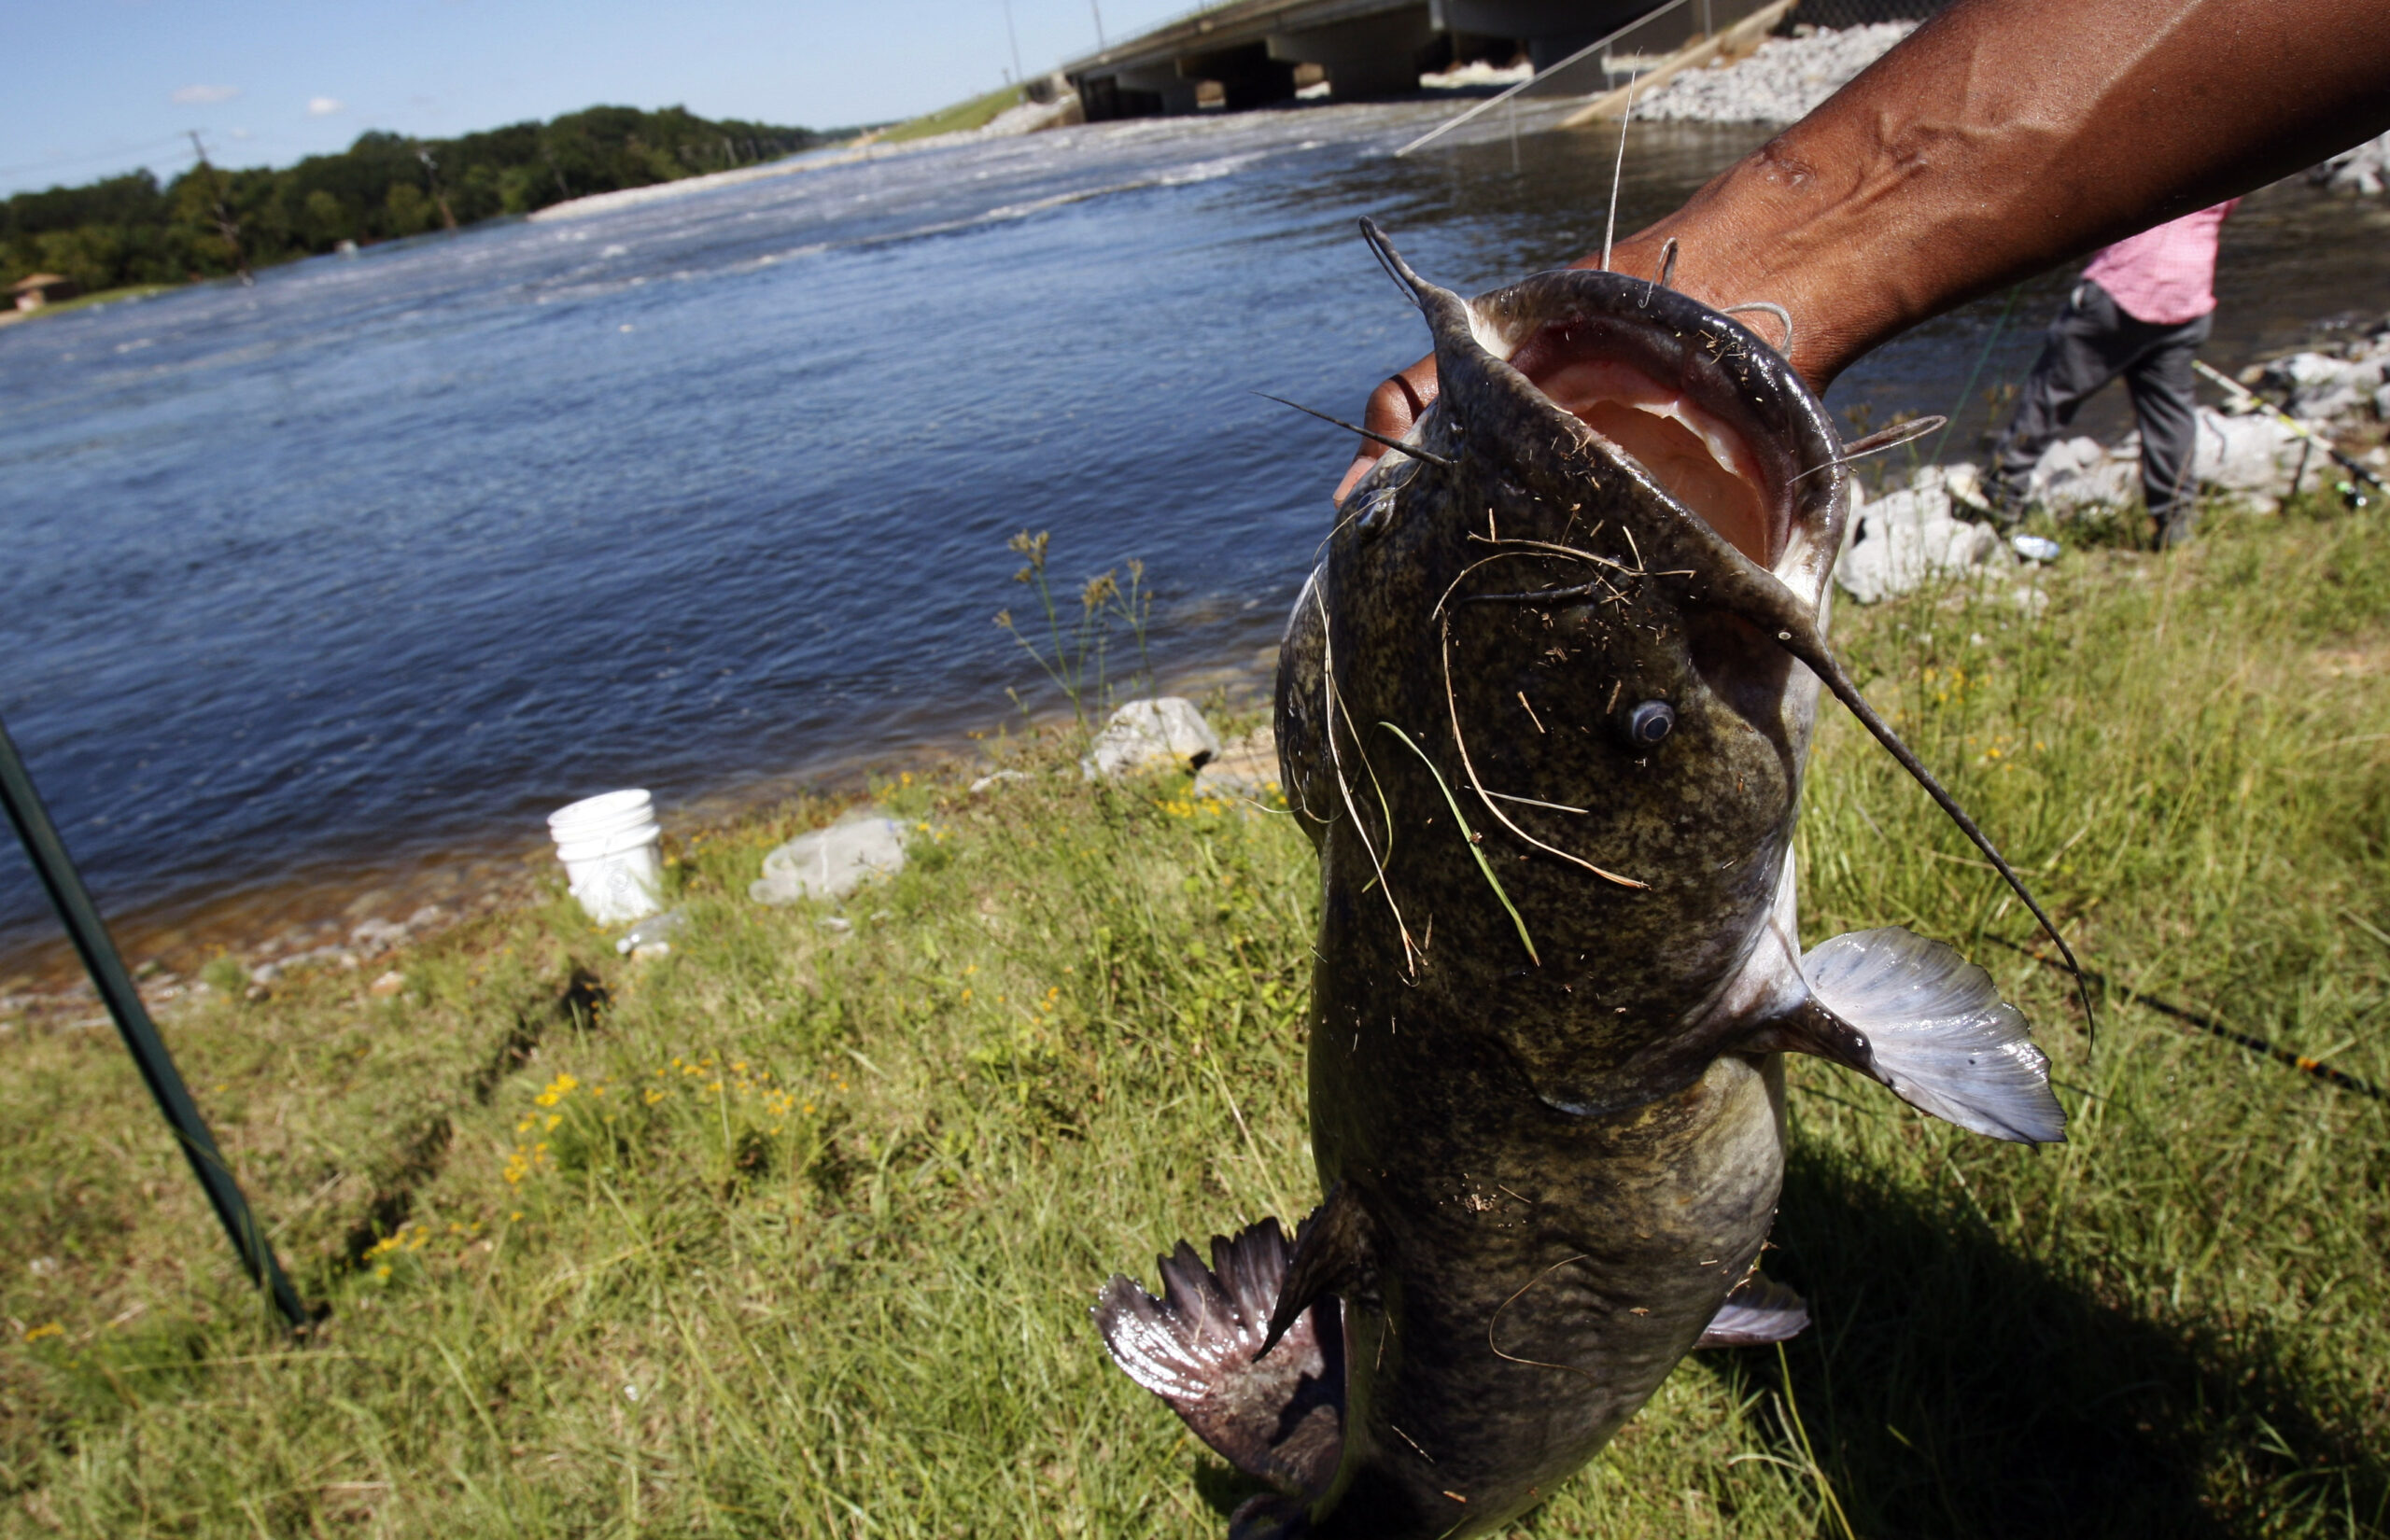 35-pound catfish pulled out of water